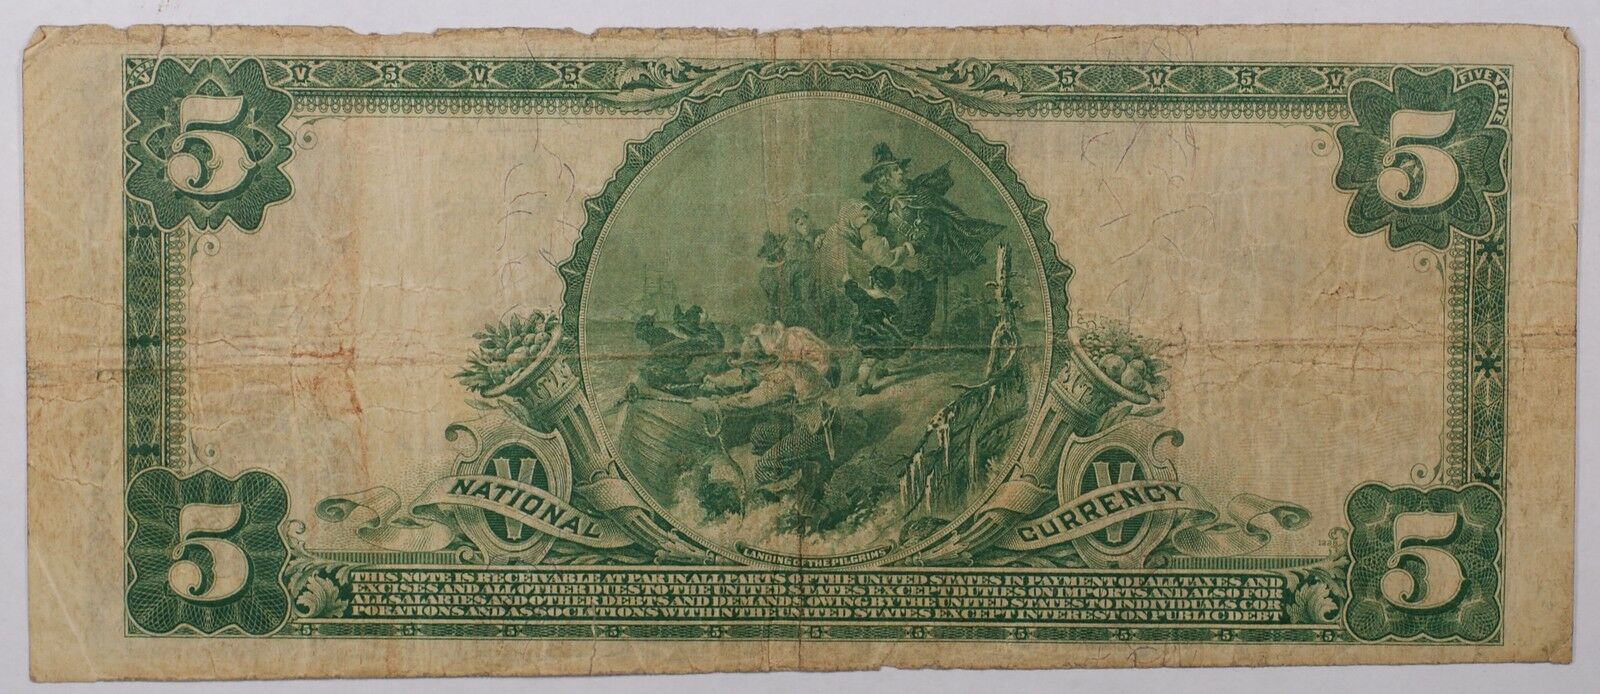 1902 $5 U.S. National Currency Banknote Farmers Salem VA **3rd Issue, 2 Known**